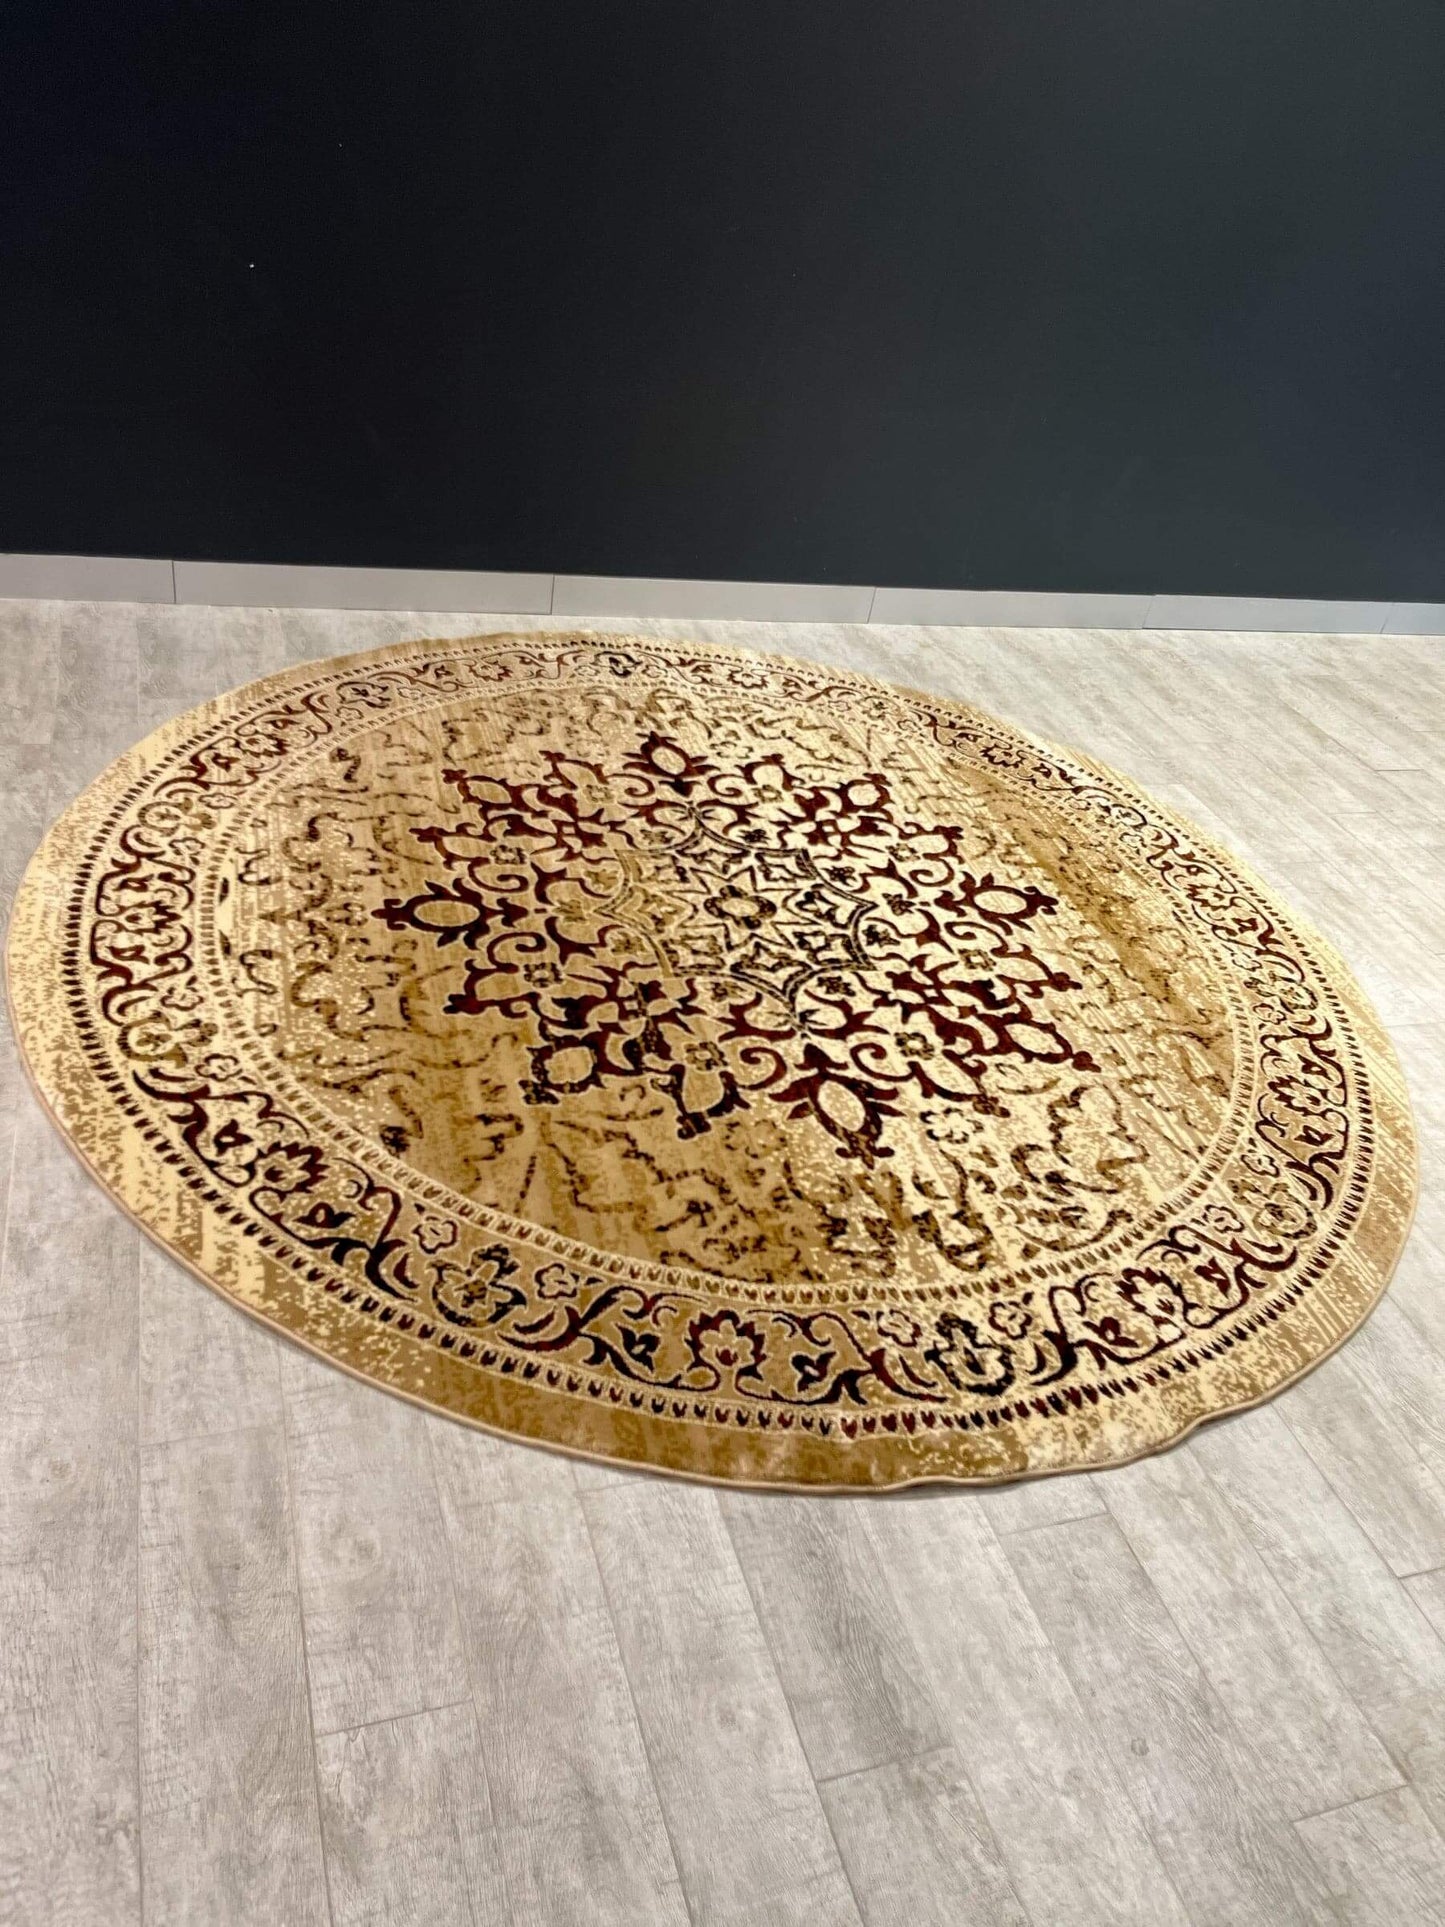 Huge Clearance, Large Round Rugs on Sale These high-quality Turkish rugs come in large rounds, perfect for any room in your home. Enjoy a discounted price on these sale rugs, making them a great value you won't want to miss!$349.00Large Round Sale Rugs 24